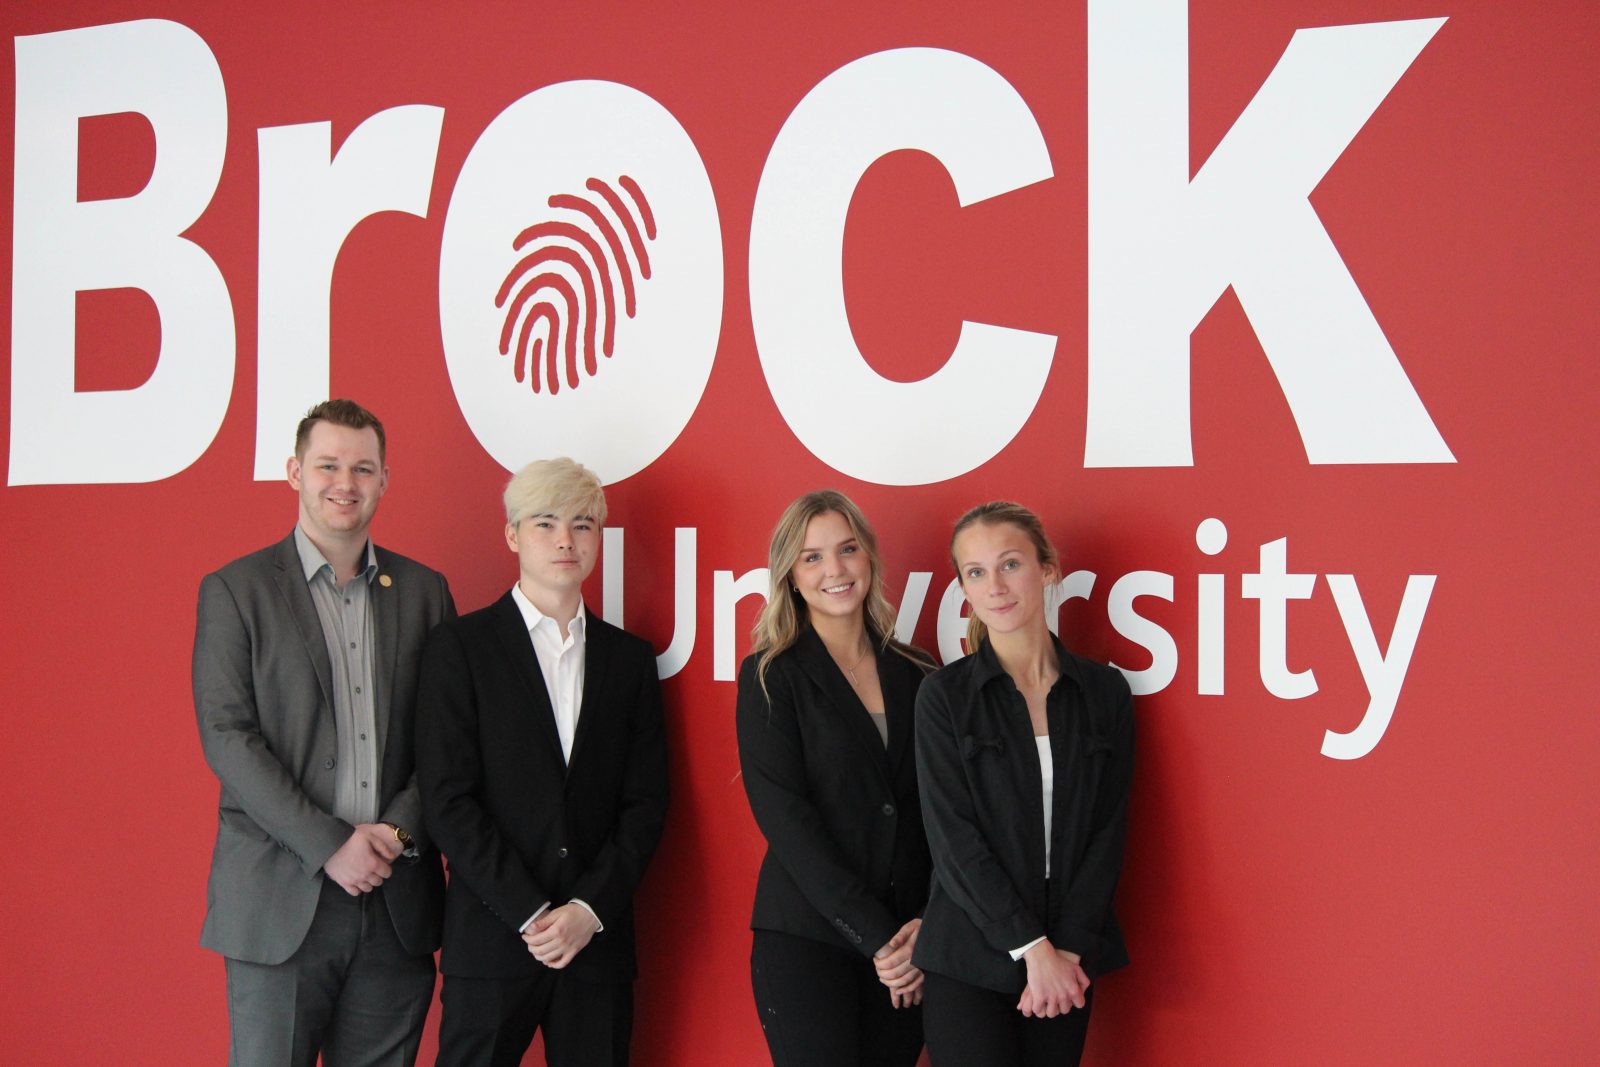 Four students stand in front of an oversized red Brock University sign